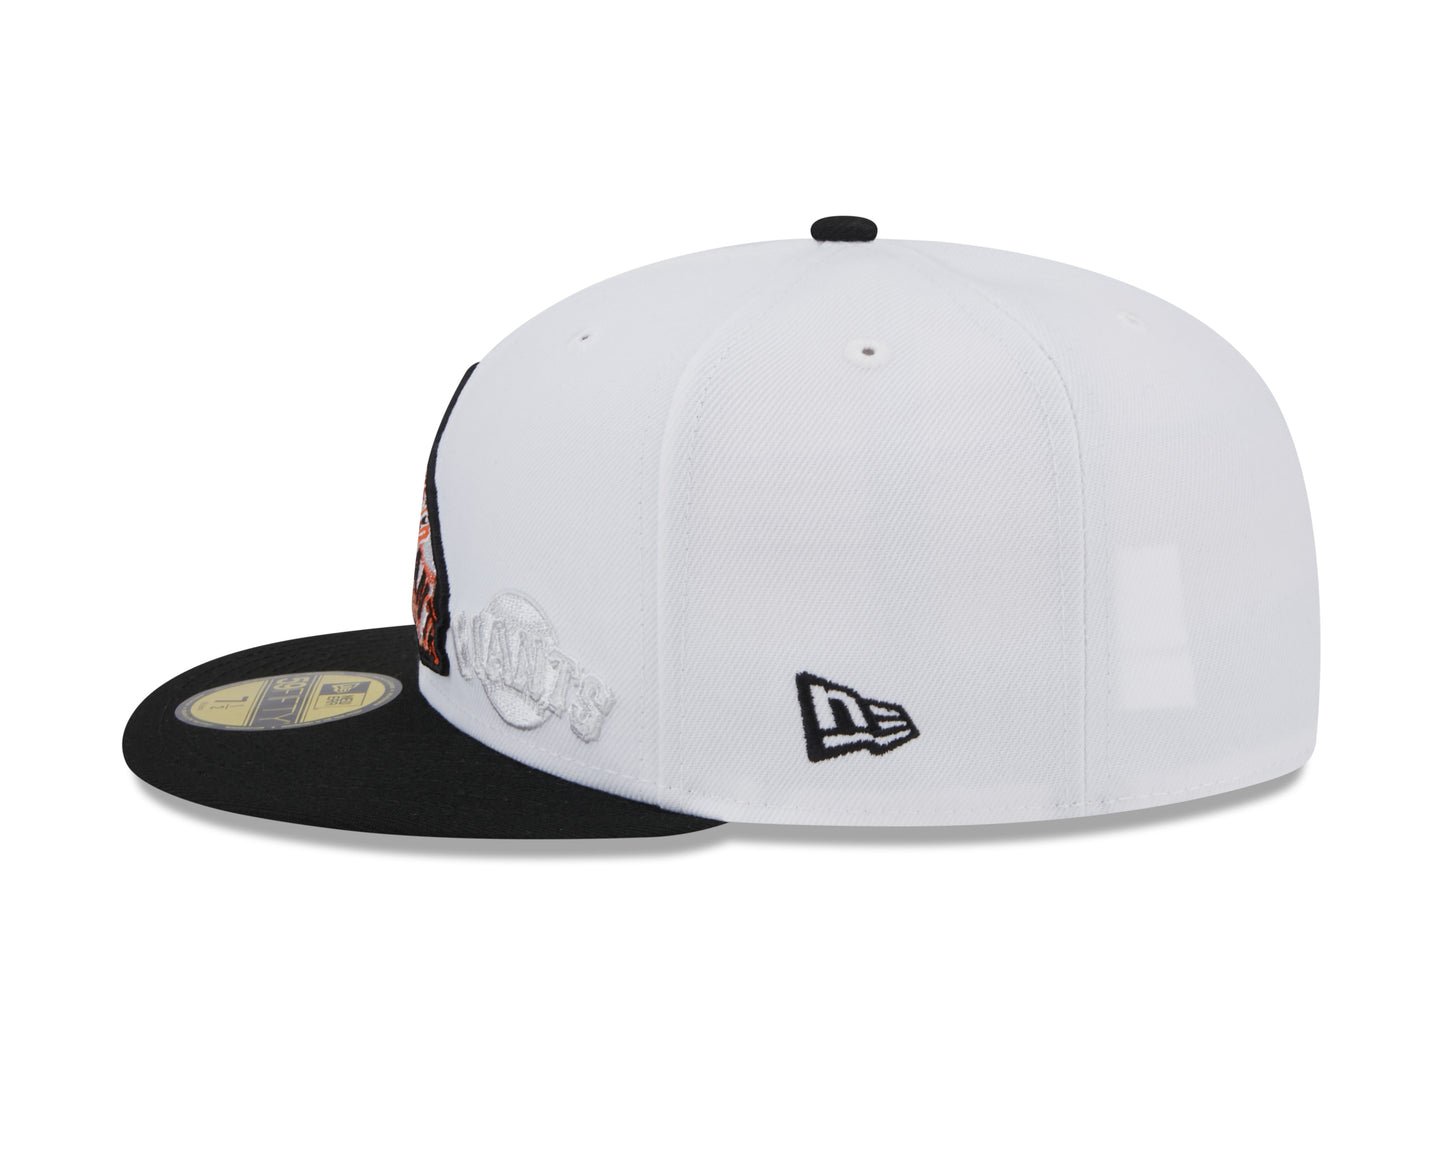 San Francisco Giants New Era State 59FIFTY Fitted Hat - White